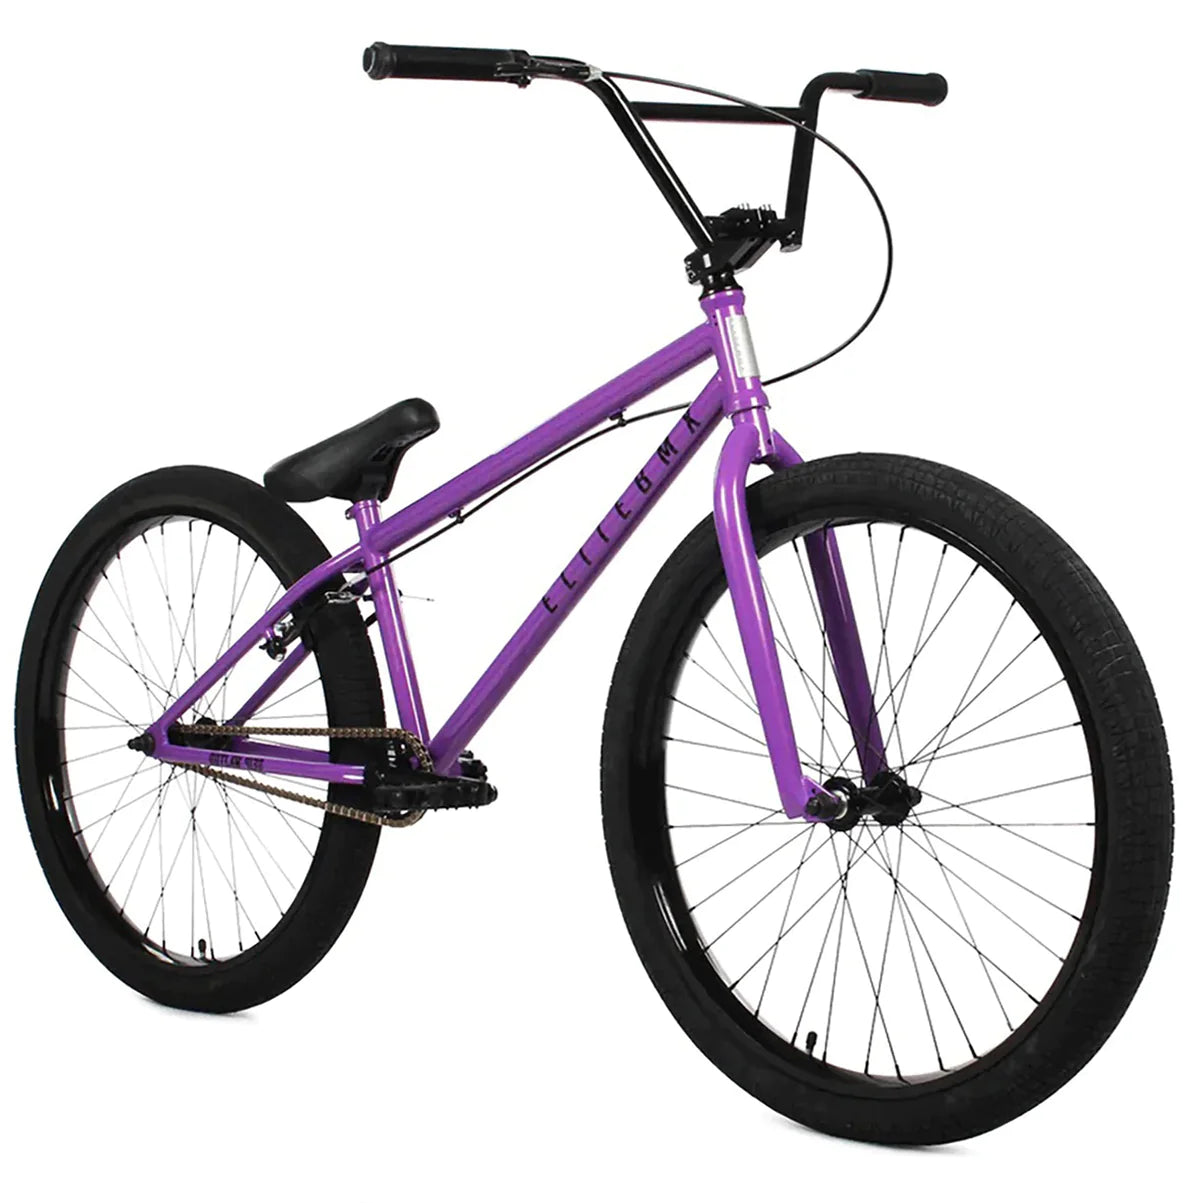 The All NEW Outlaw 4130 CrMo 26" BMX